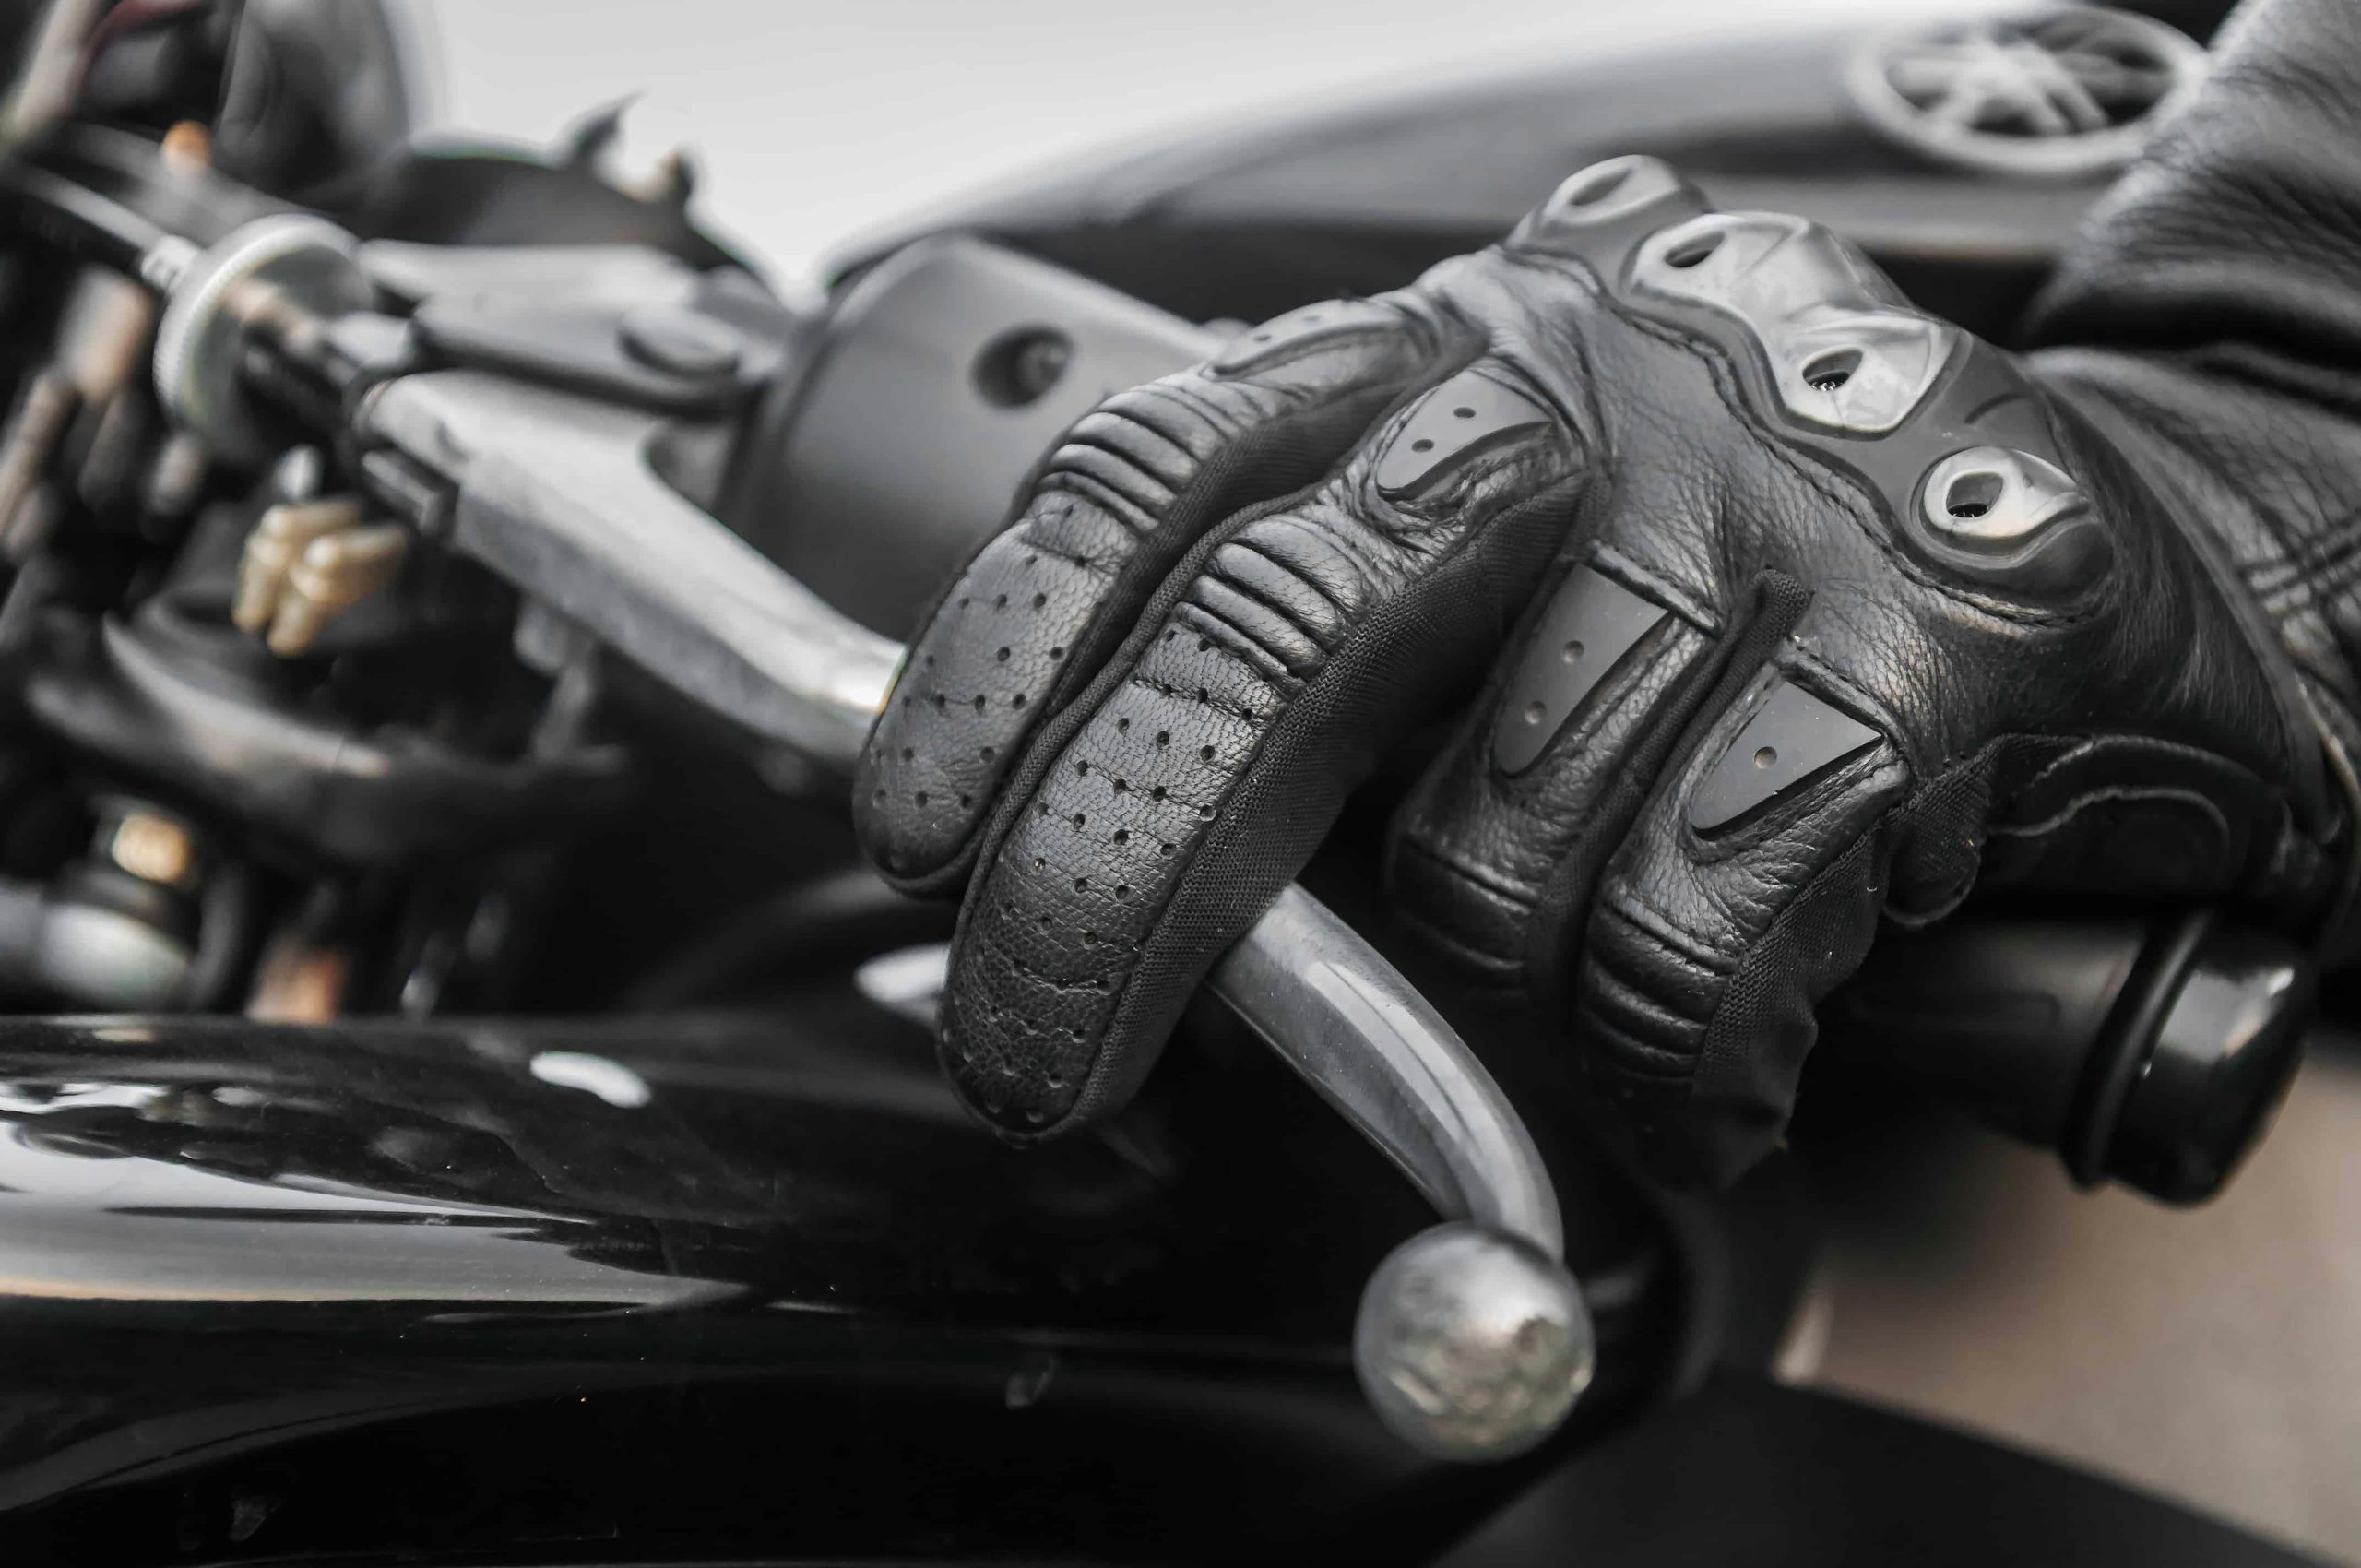 A pair of riding gloves